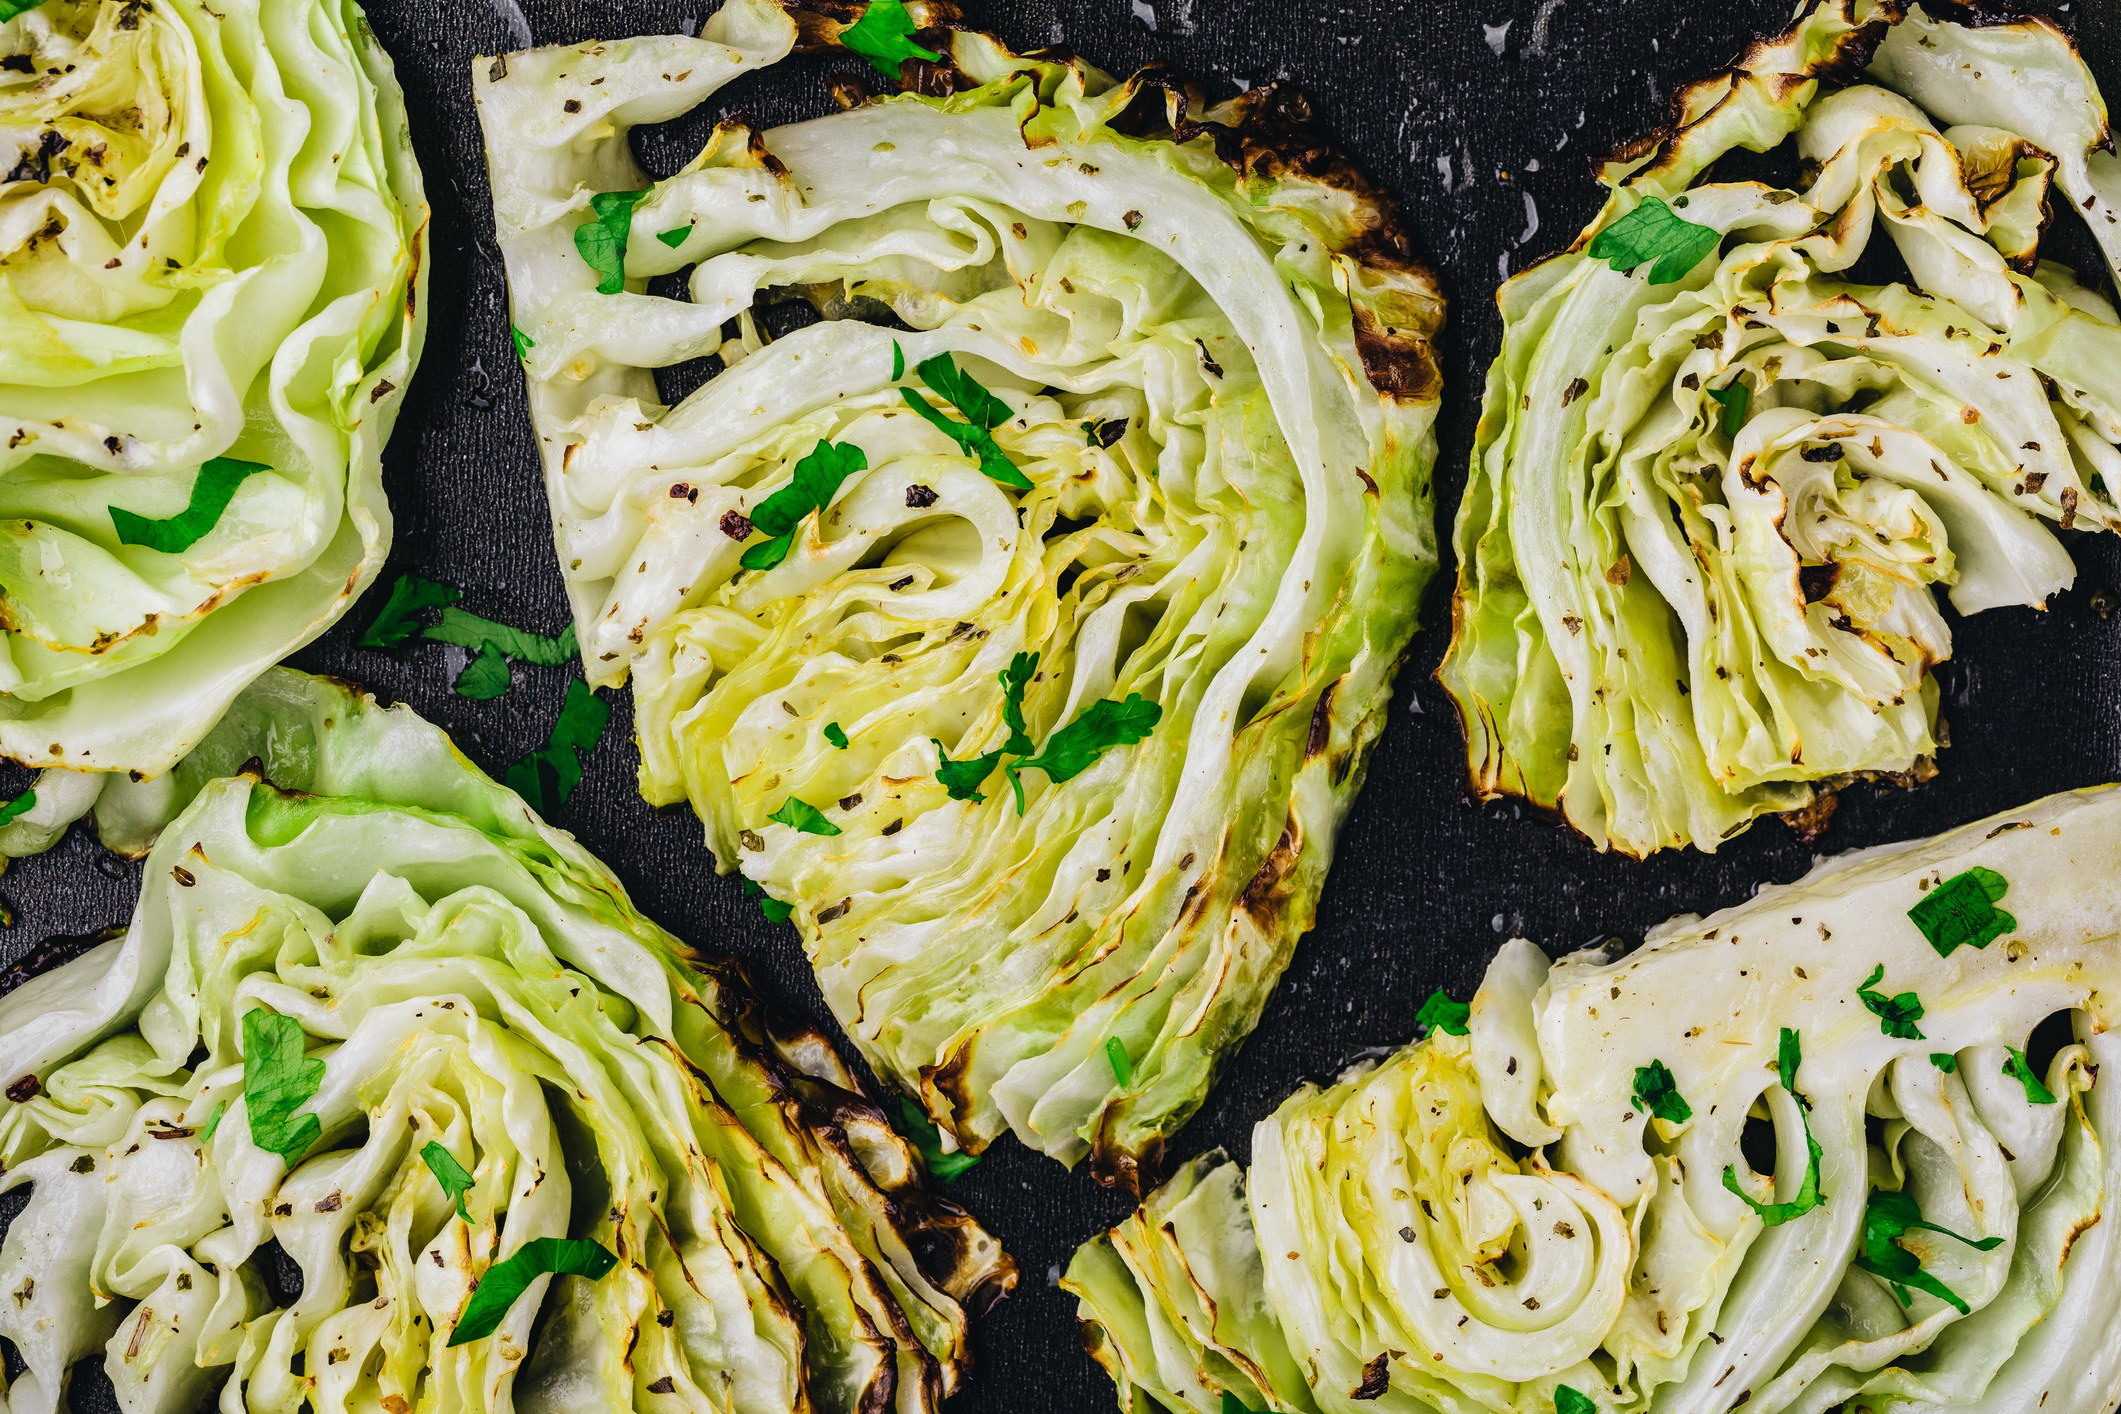 Charred cabbage wedges